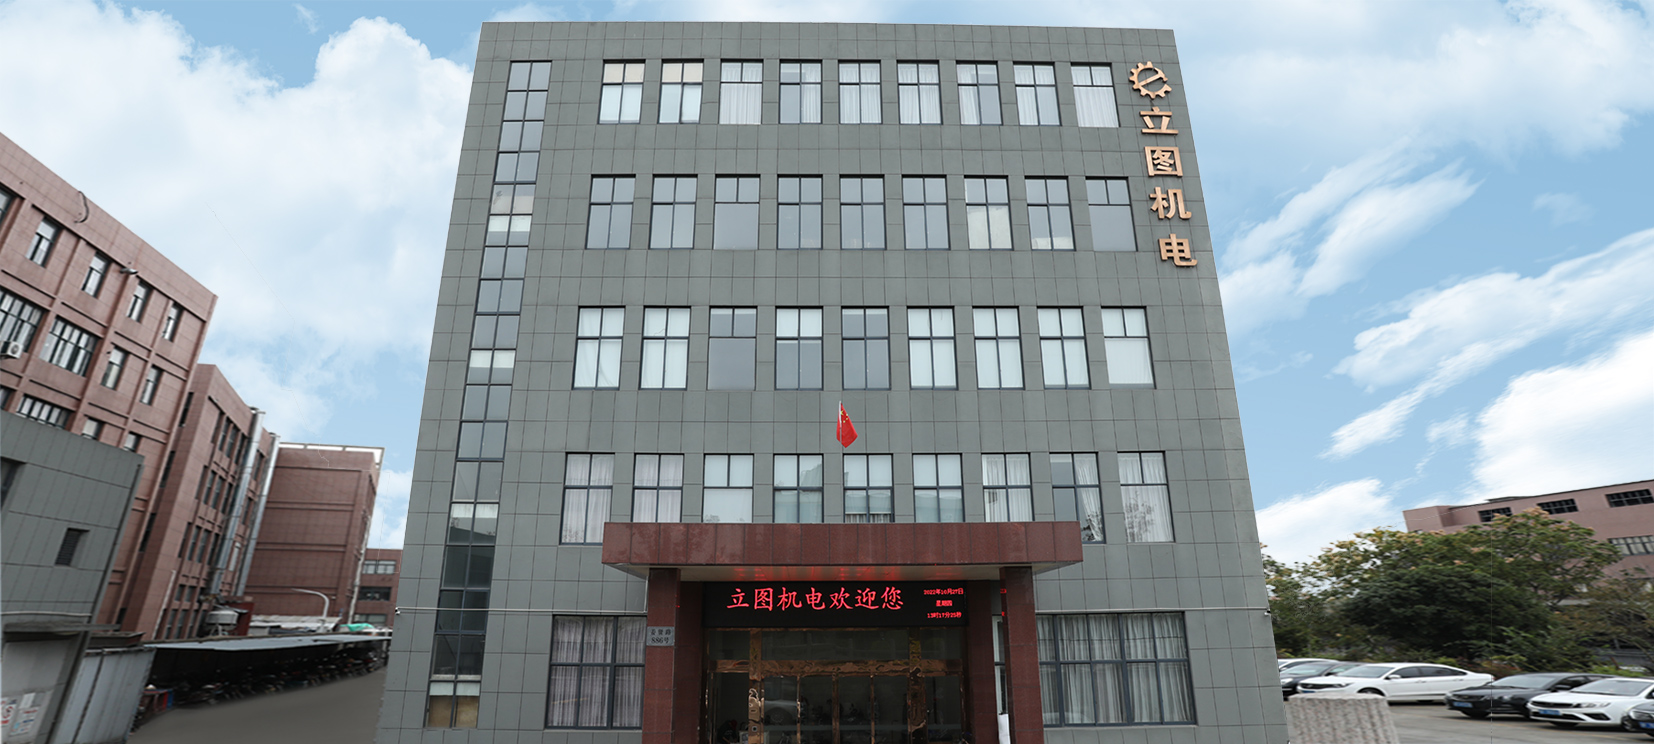 Jiaxing Liftool Machinery and Electrical Co., Ltd.